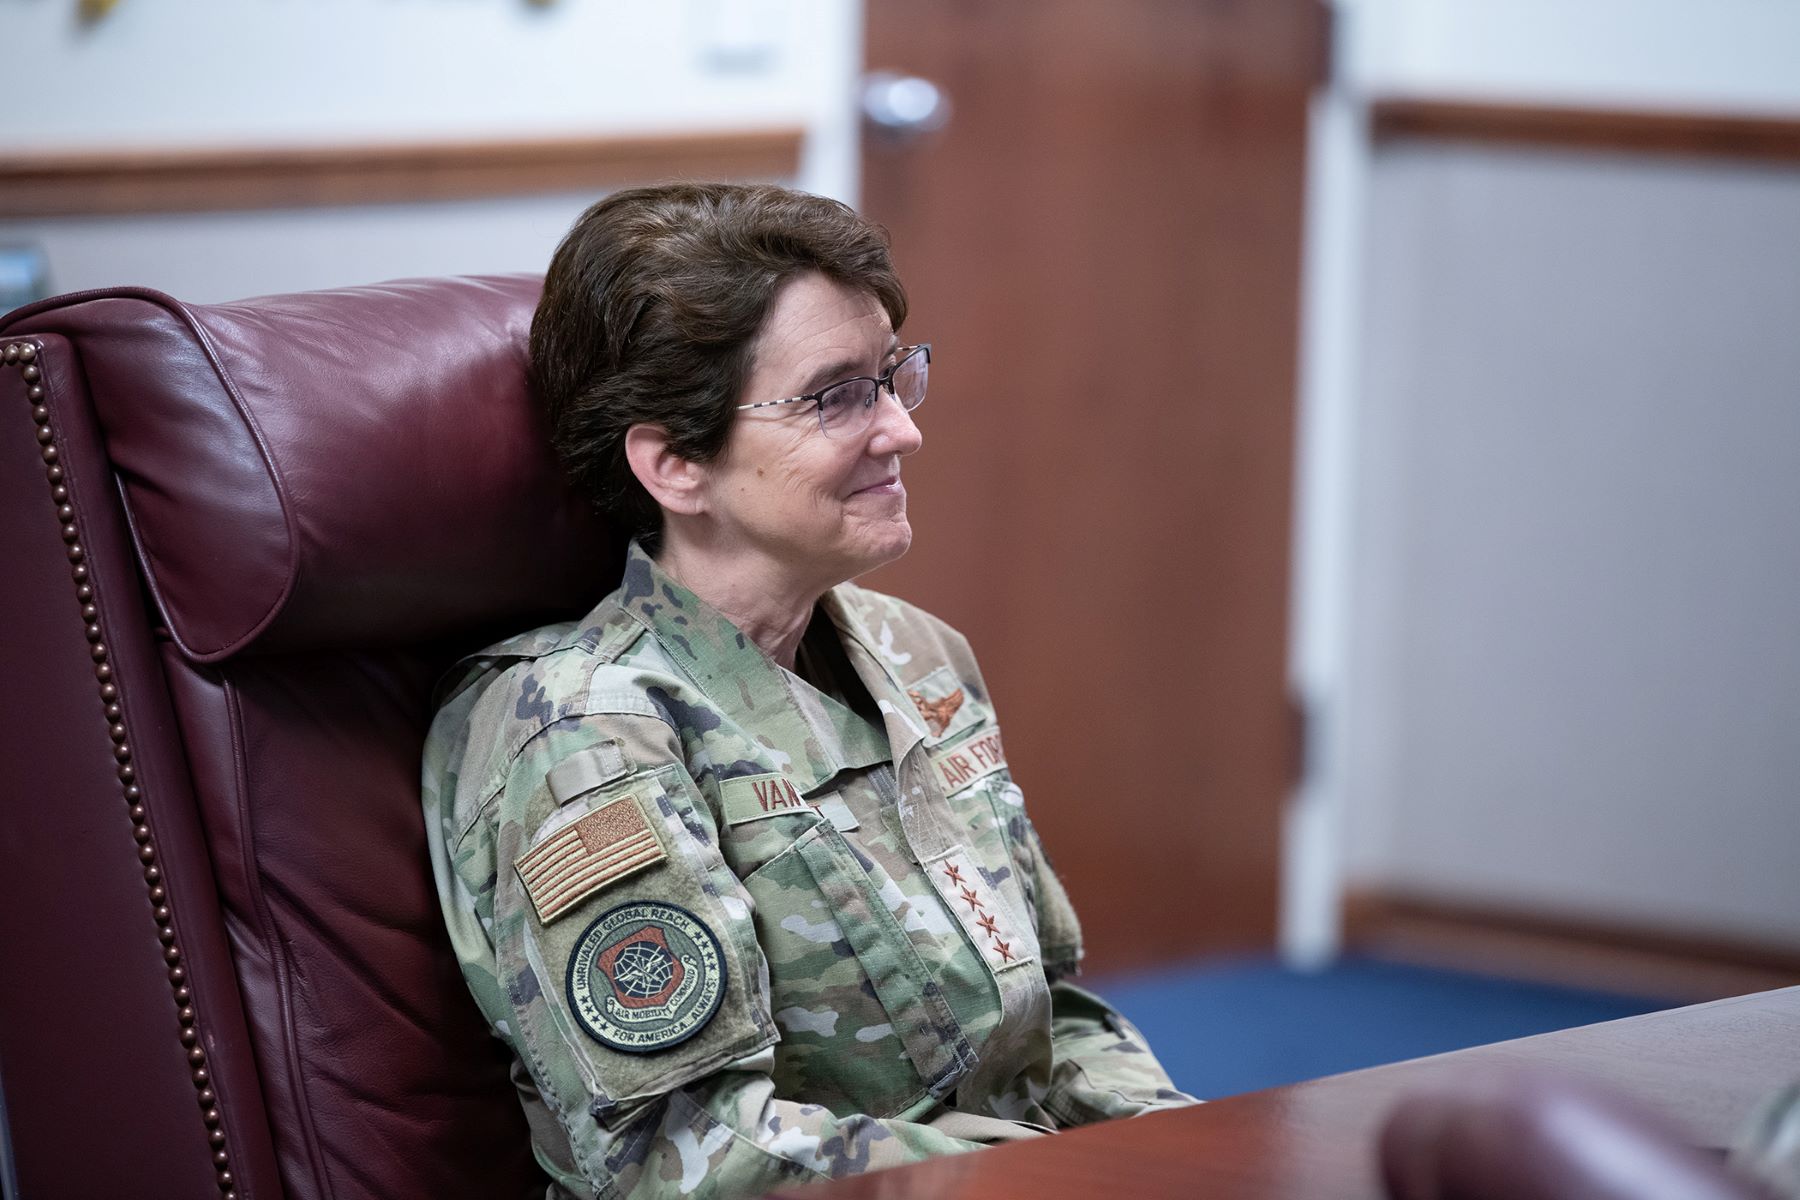 She Once Was Barred from Fighter Now She's the Pentagon's Only Female Four-Star | Military.com